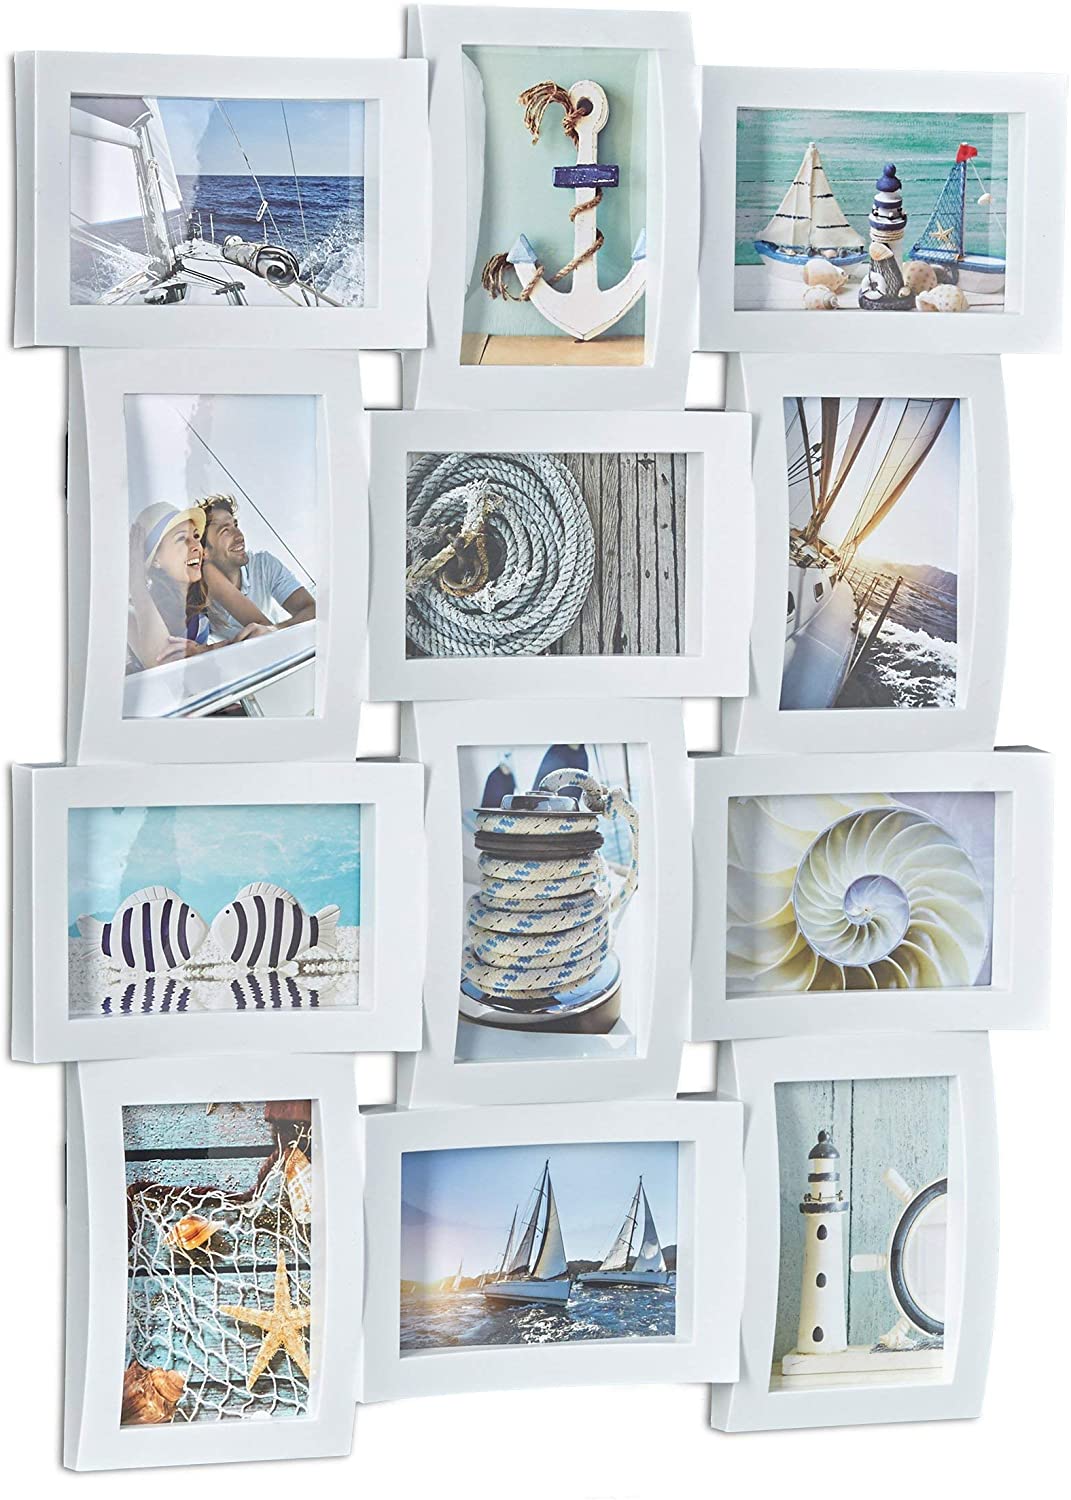 Relaxdays Multi Photo Frame Collage for 12 Photos - H x W x D: 60.5 x 47.5 x 3.5 cm - Black or White